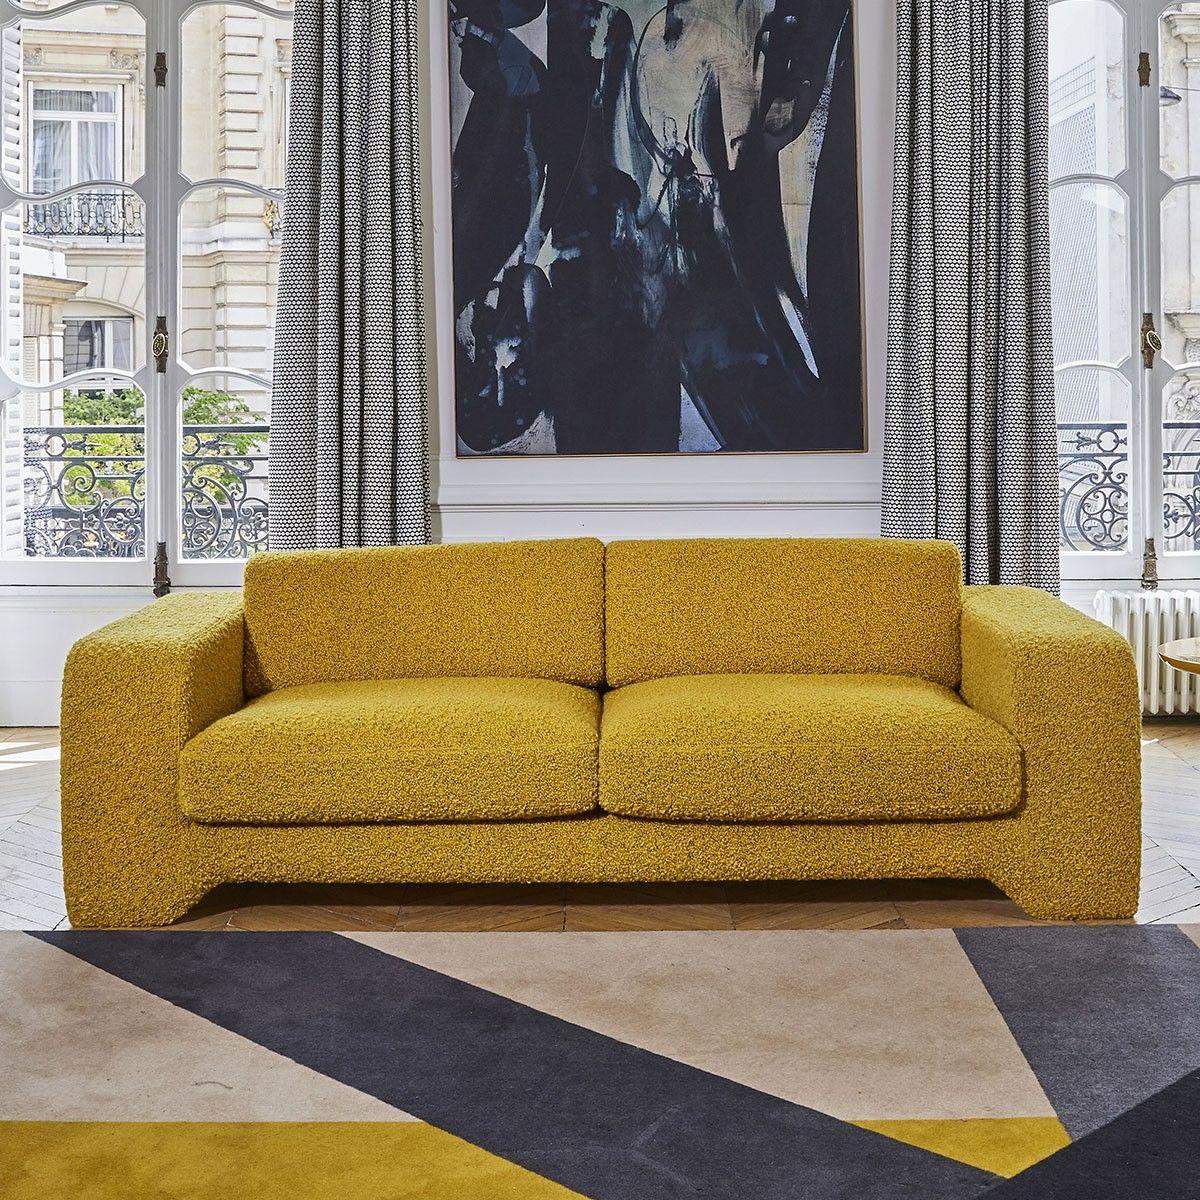 Popus Editions Giovanna 4 seater sofa in Mole Malmoe Terry Upholstery

Giovanna is a sofa with a strong profile. A sober, plush line, with this famous detail that changes everything, so as not to forget its strength of character and this charming